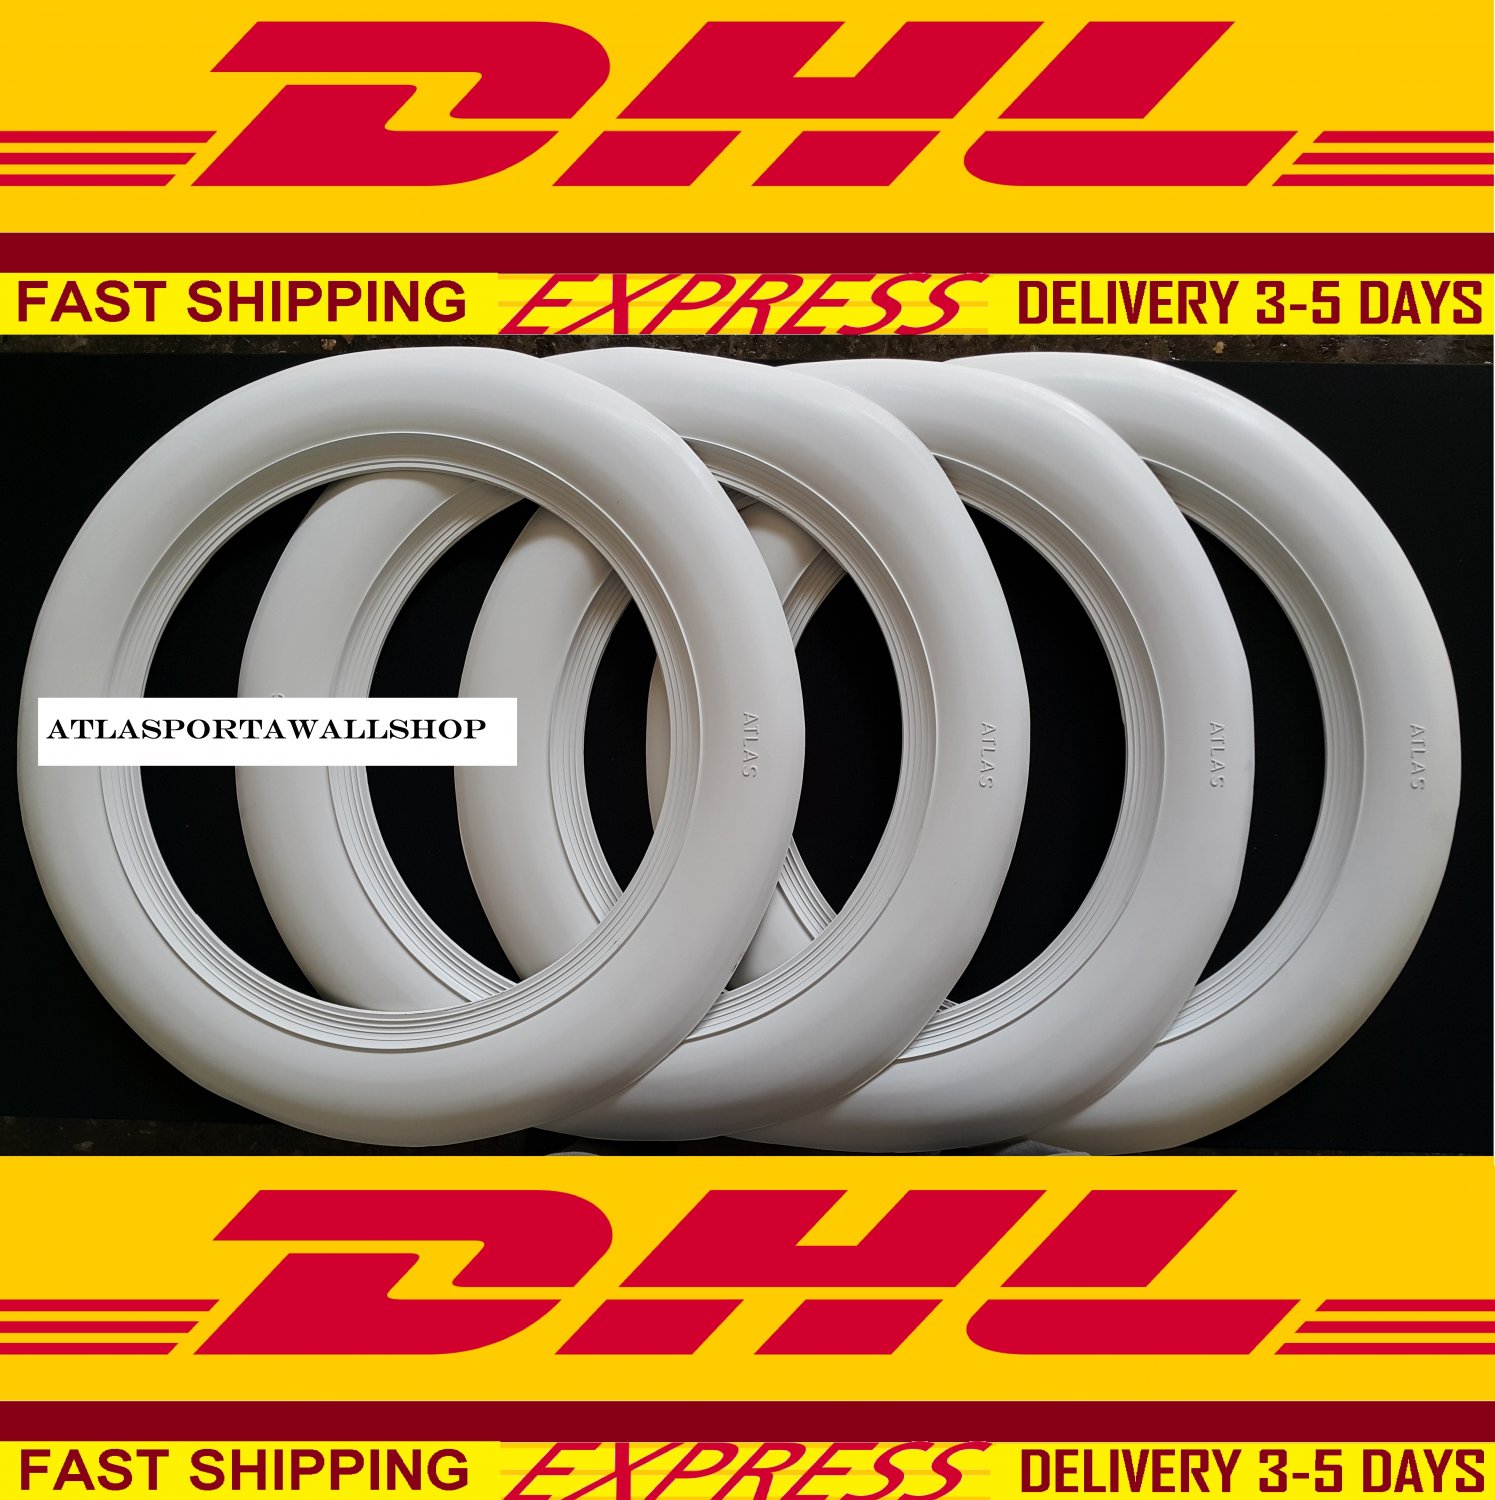 Atlas 12'' Add-On White Wall PORT-A-WALL Tyre insert Trim Set.,DHL Free Shipping 